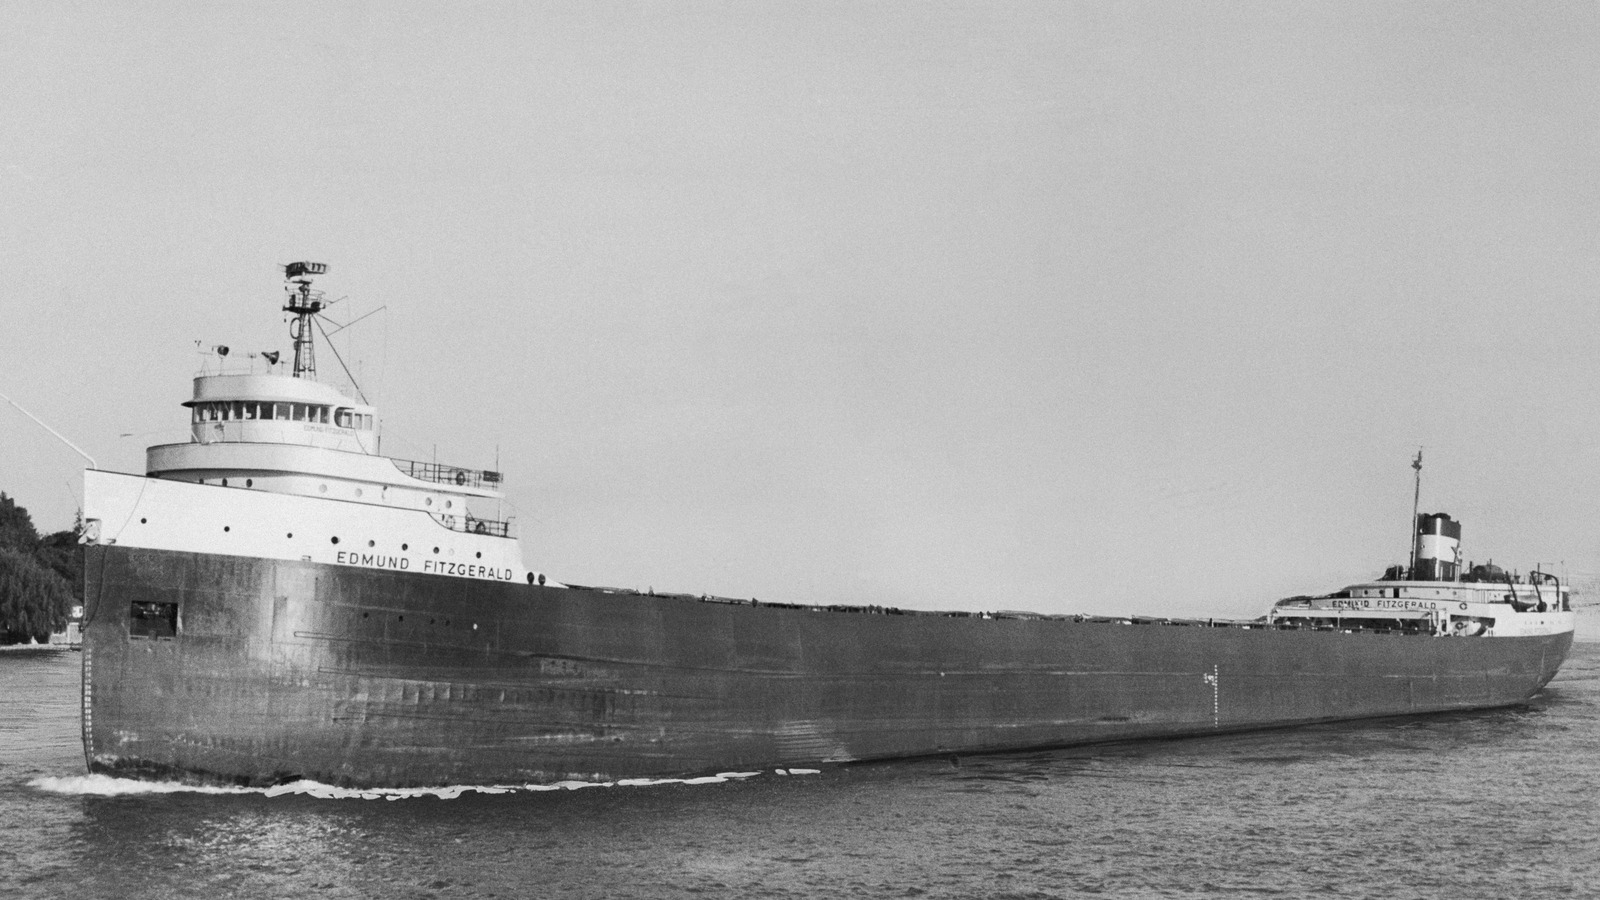 48 Years Later, The Sinking Of The Edmund Fitzgerald Remains A Mystery